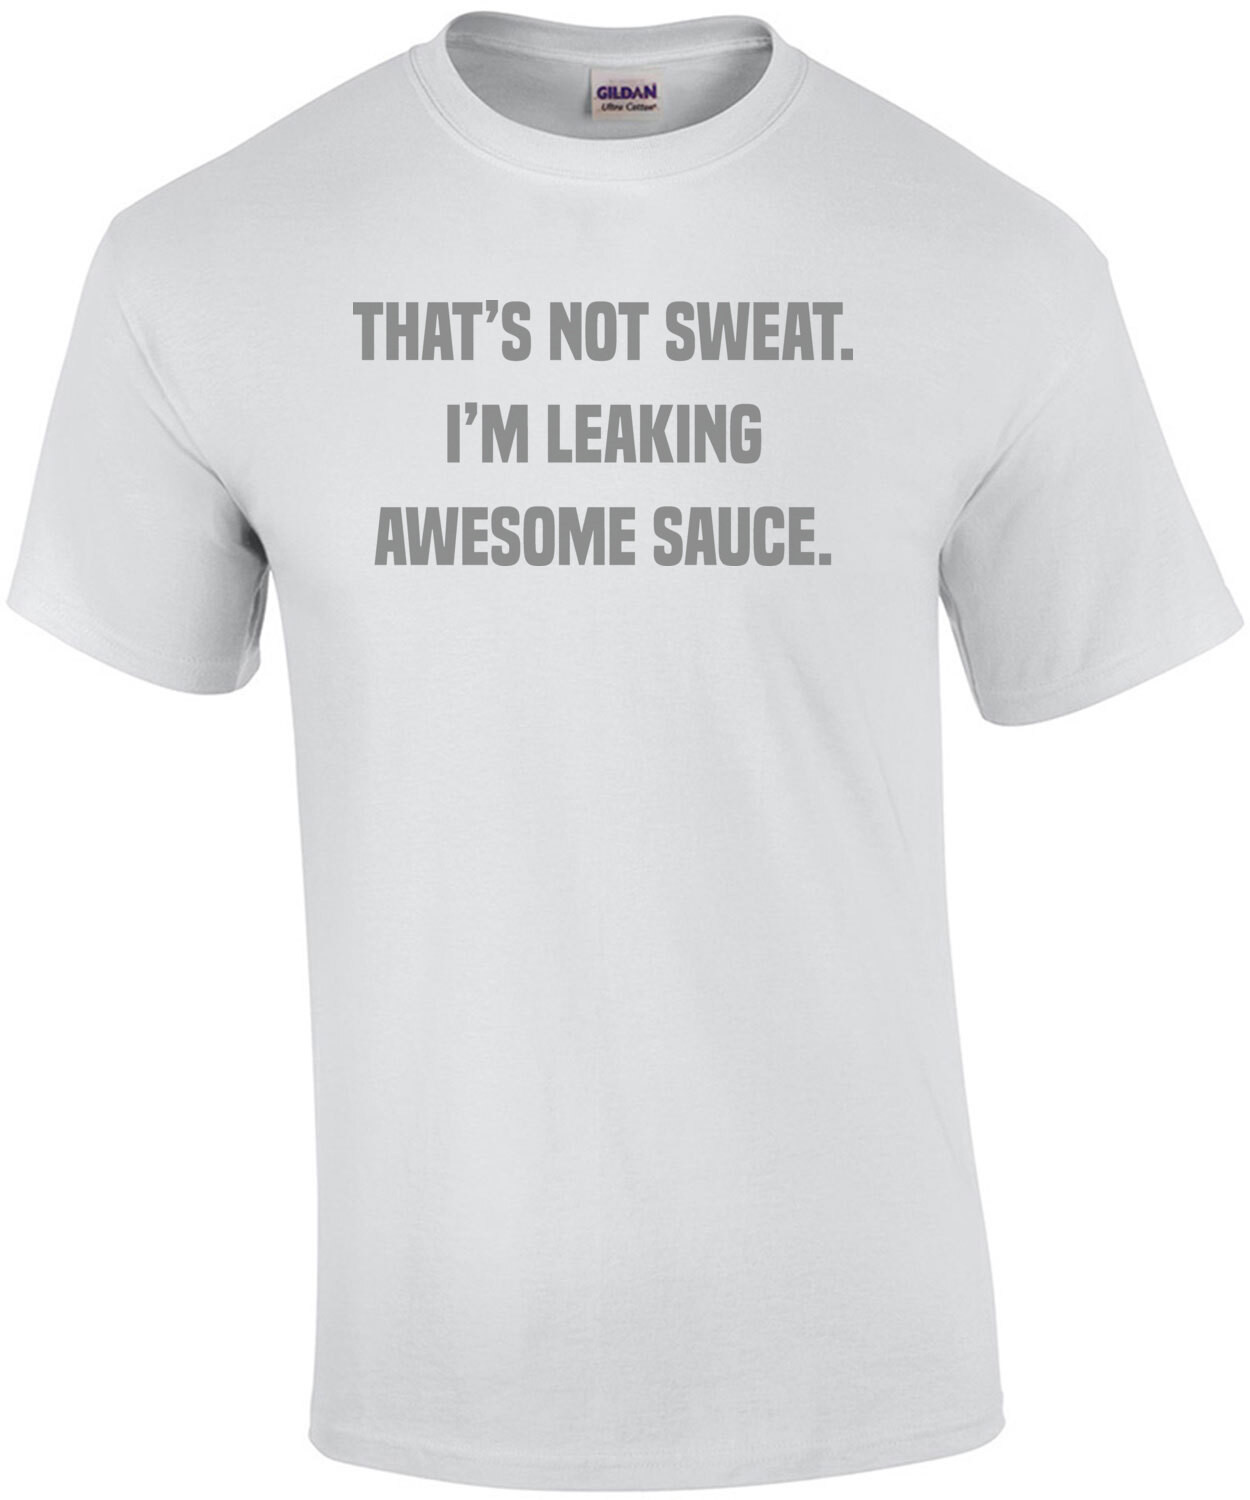 That's not sweat. I'm leaking awesome sauce. Work out t-shirt